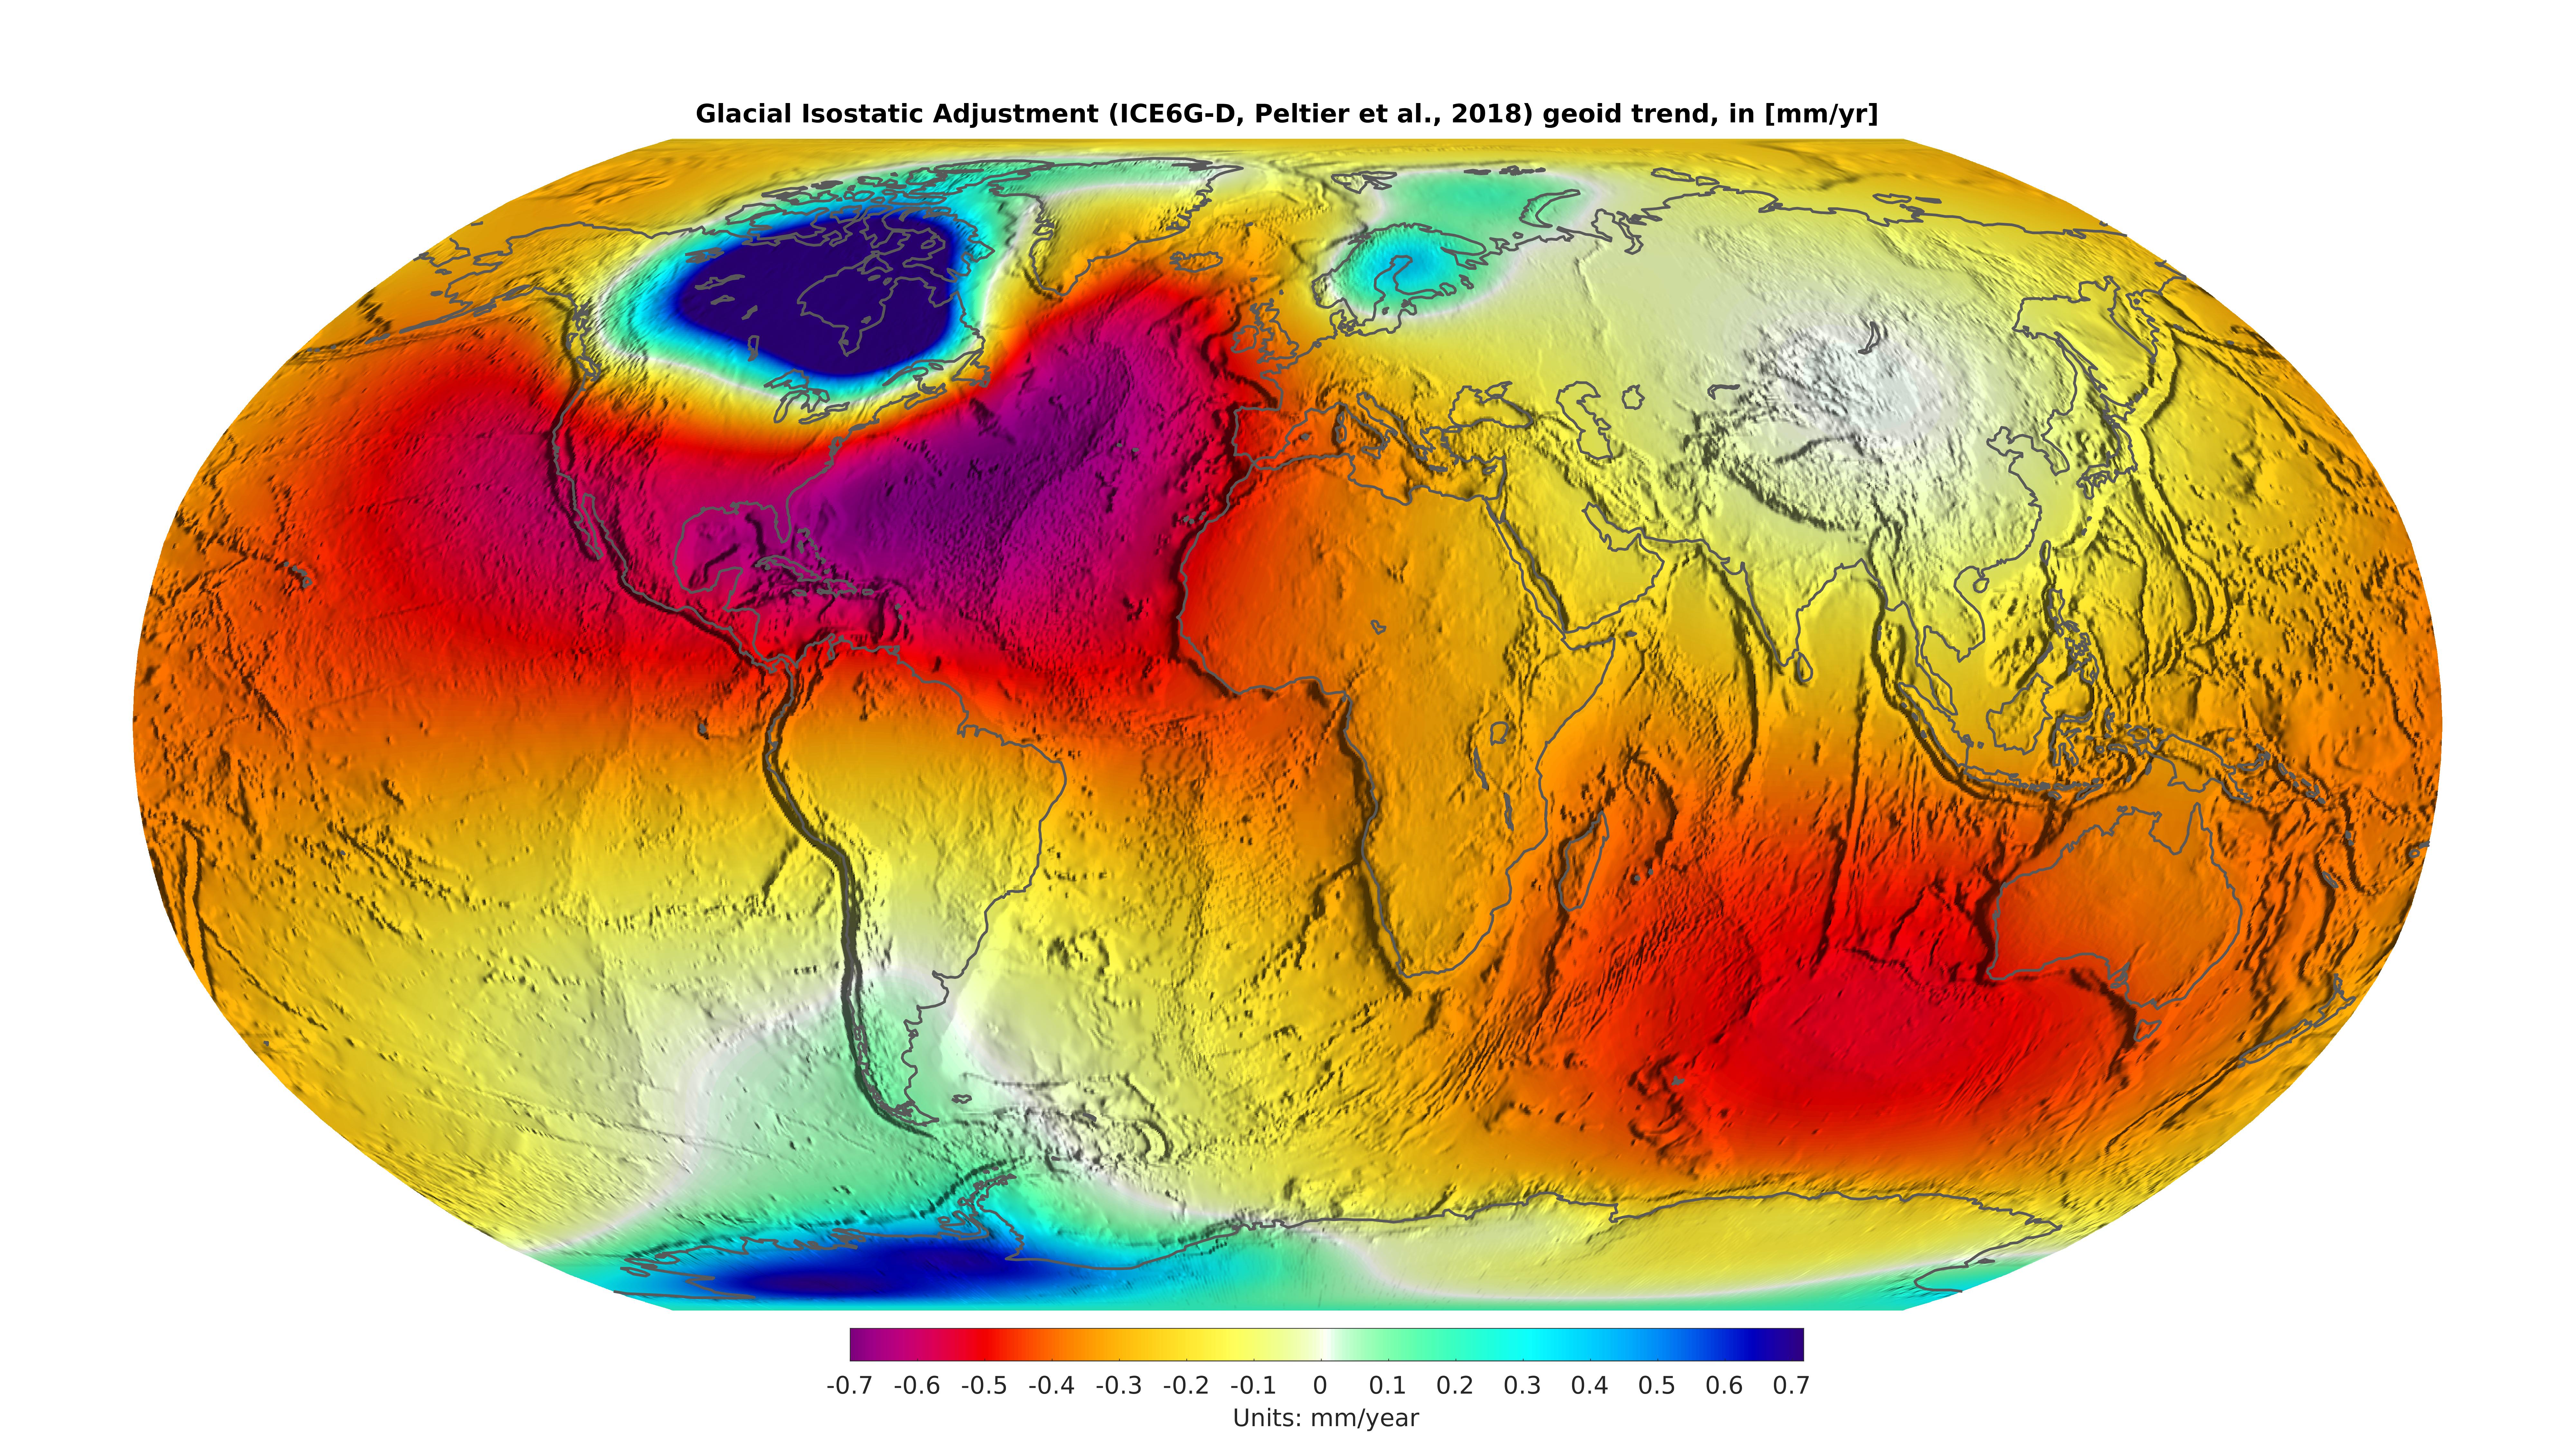 GIA ICE6G-D geoid rates (300km smoothing)